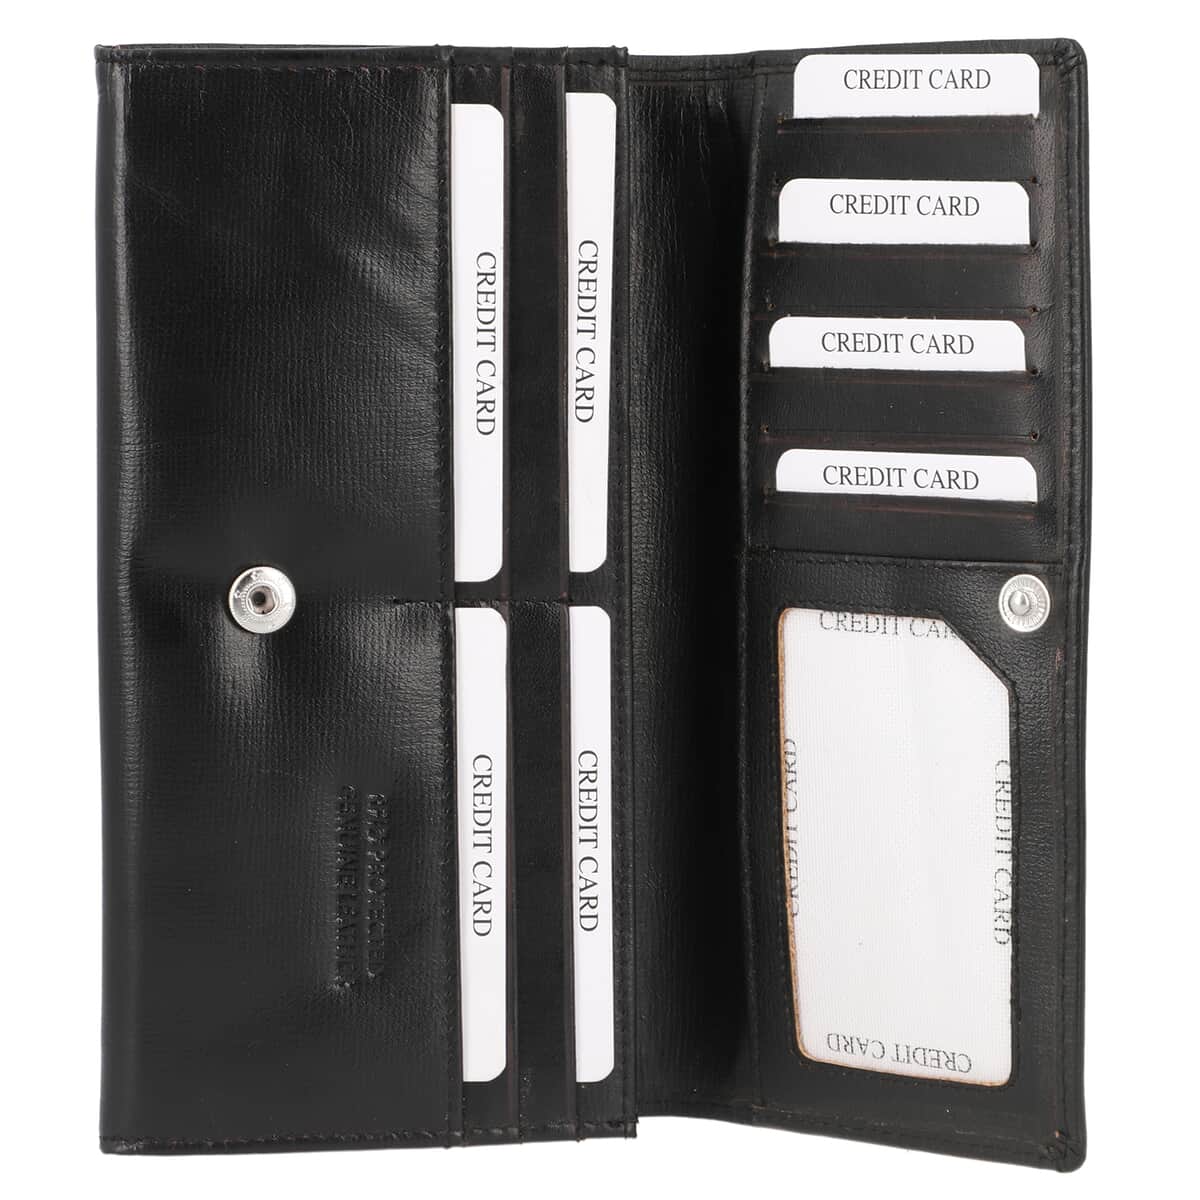 "UNION CODE -RFID Protected 100% Genuine Leather Women's Wallet SIZE: 7.5(L)x4.5(W) inches COLOR: Black " image number 4